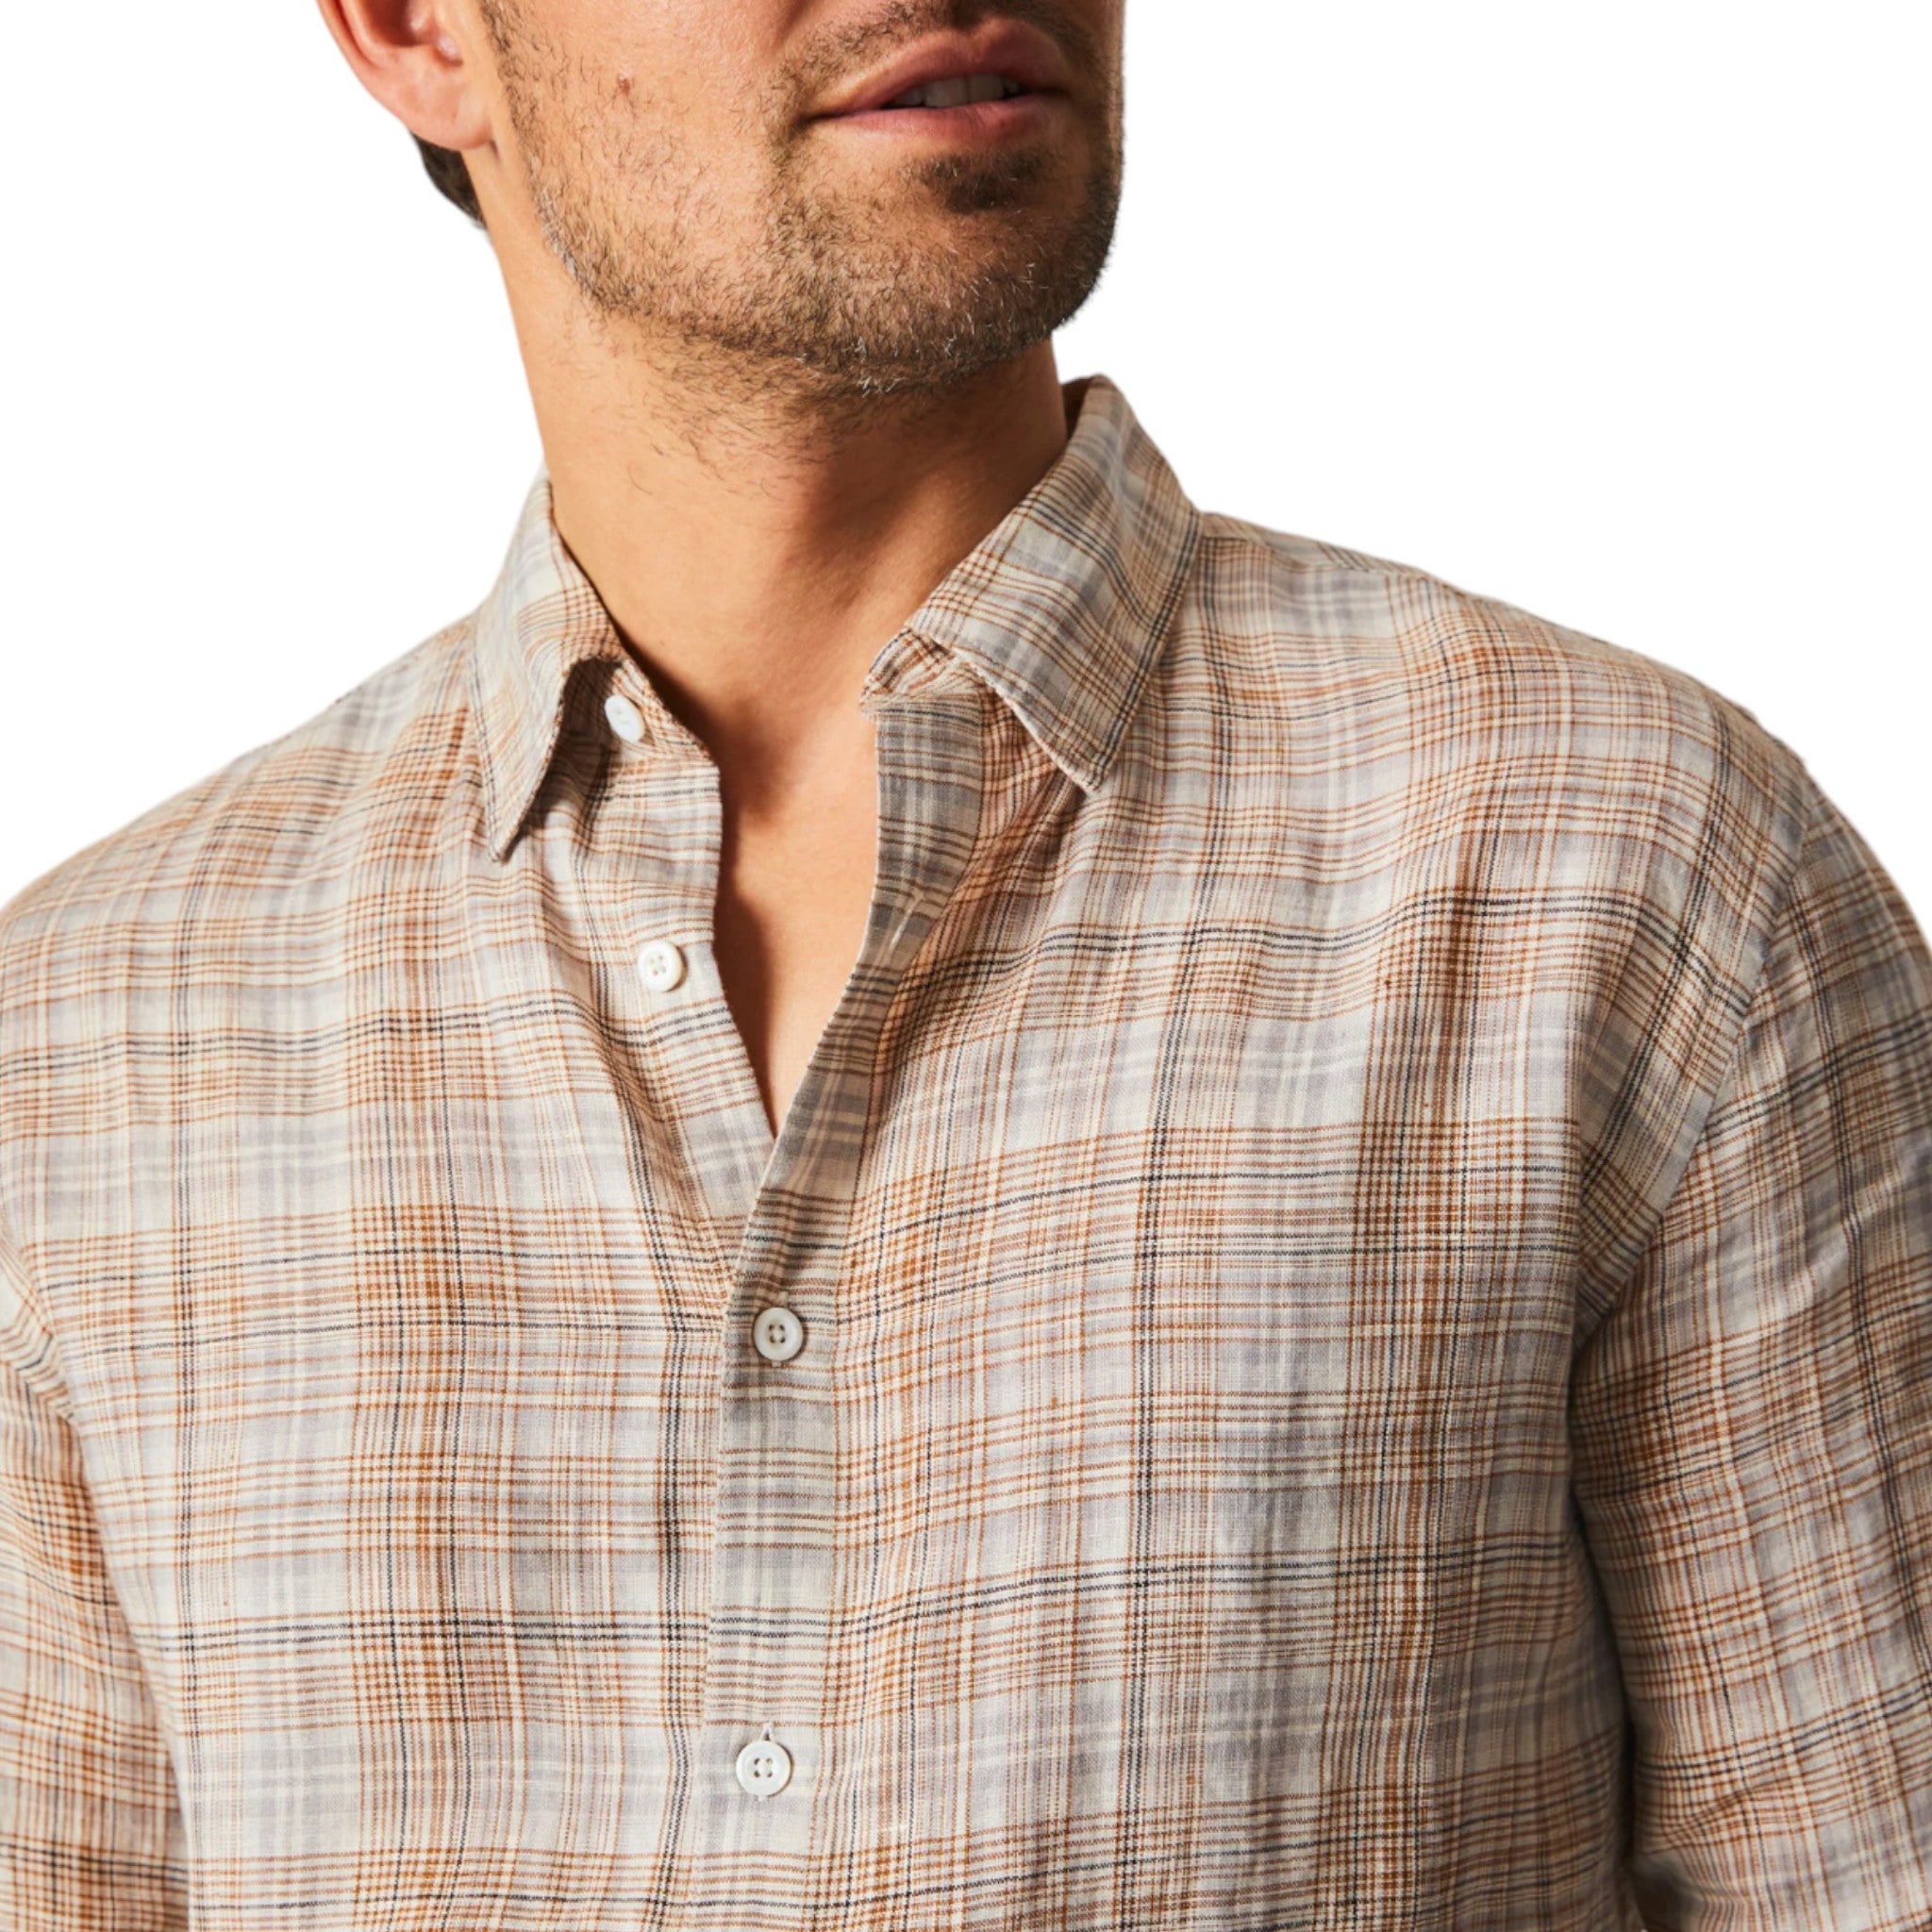 Brown toned button up shirt with collar